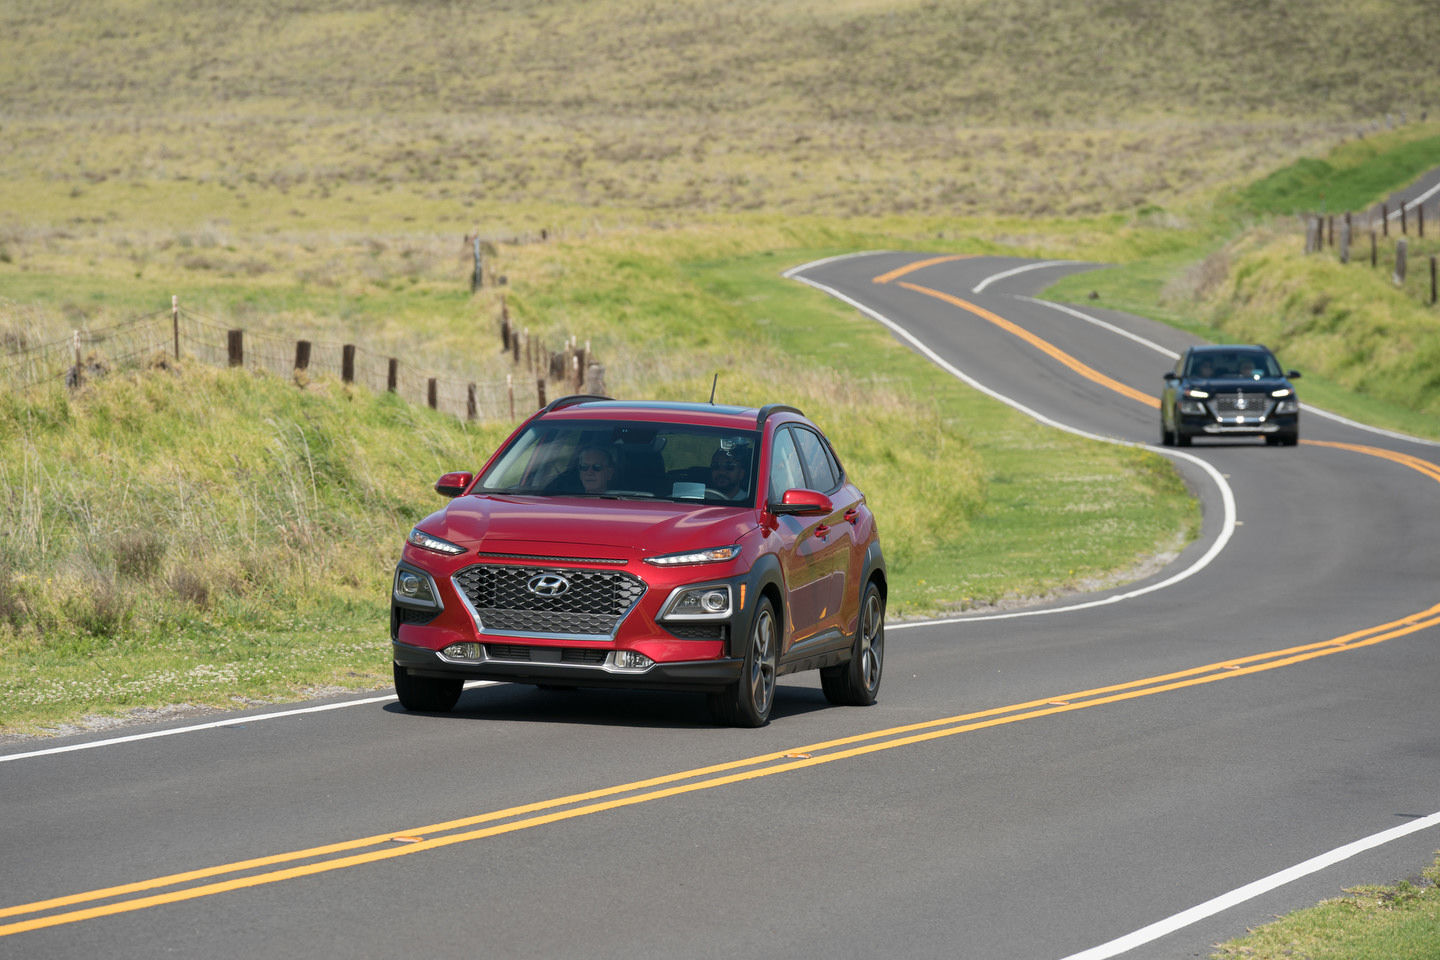 Seven Hyundai models among Best New and Used Vehicles for Teens according to IIHS